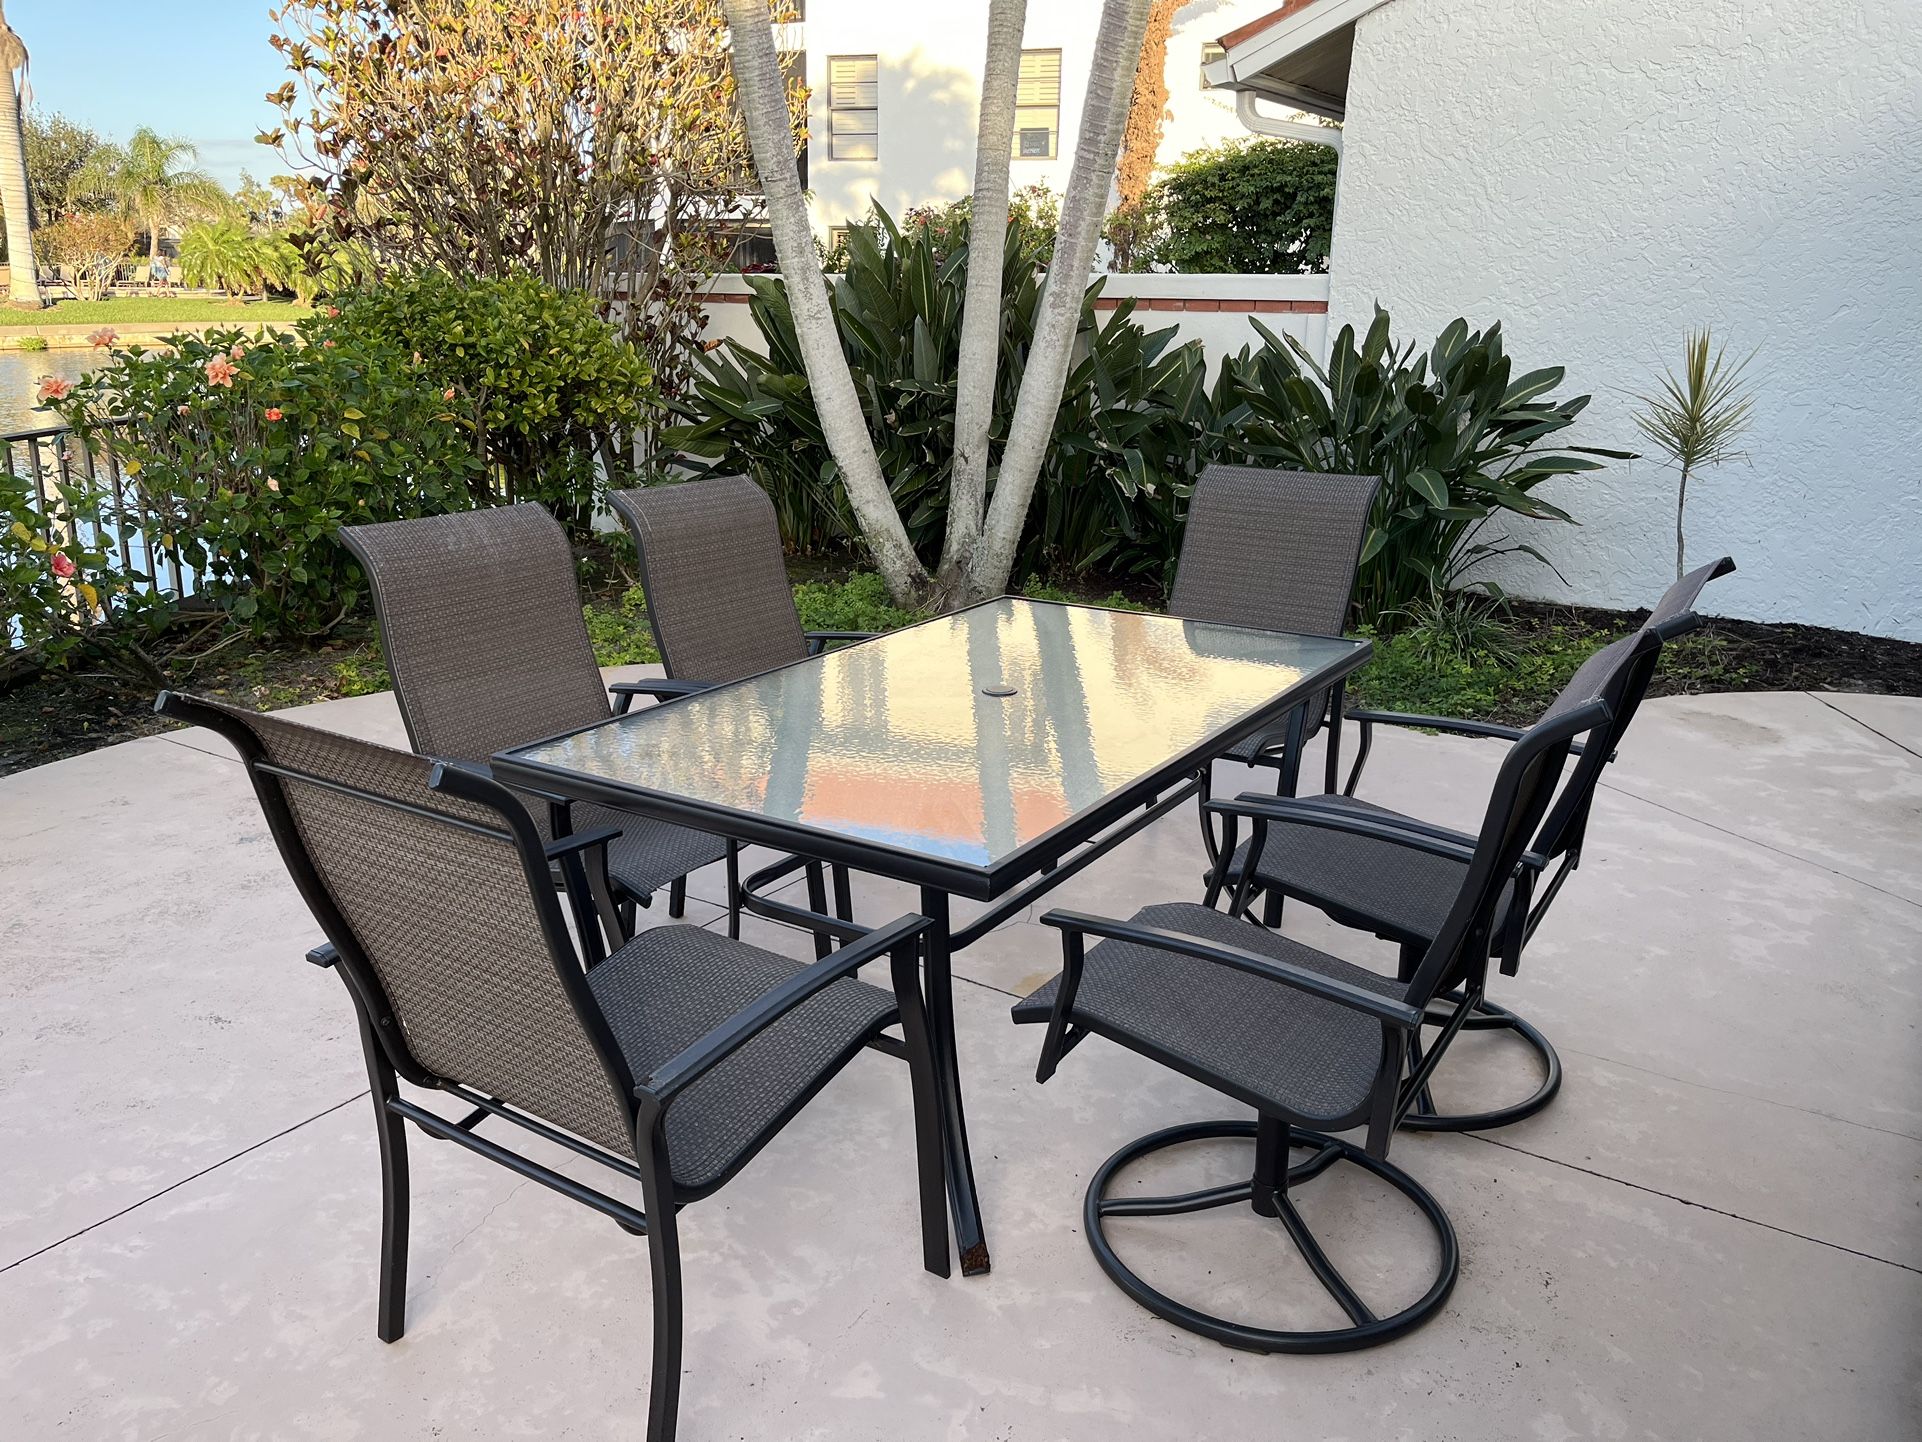 Seven Piece Glass Top Dining Patio Set - Table & Chairs!